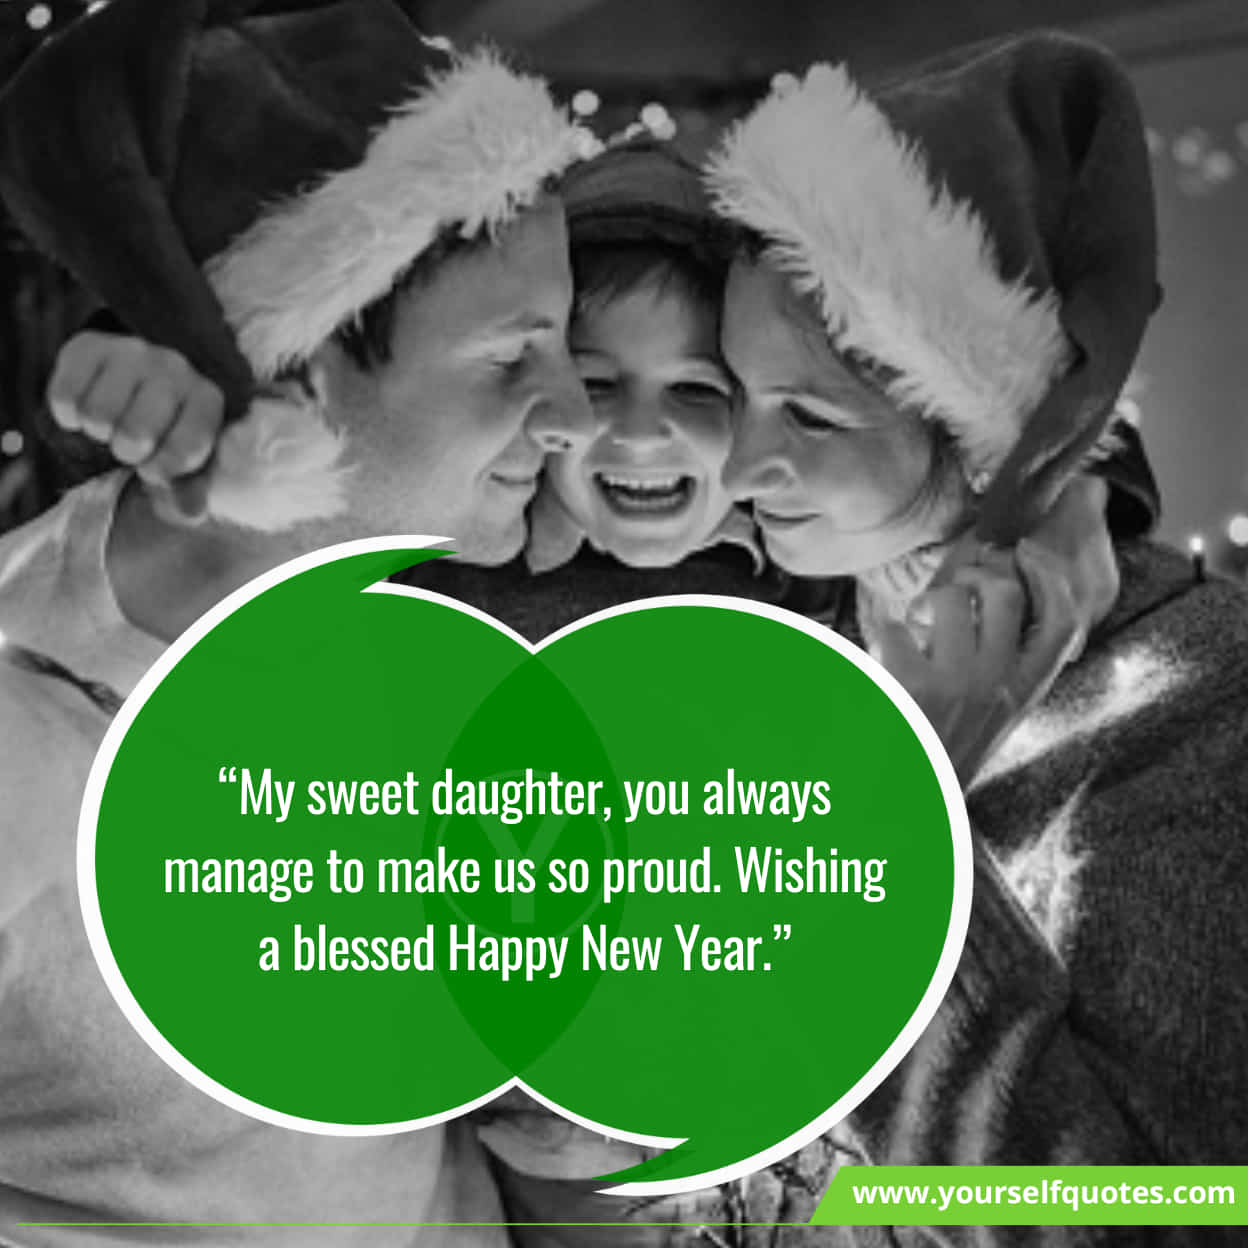 Heart-Warming Wishes For Daughter On Happy New Year